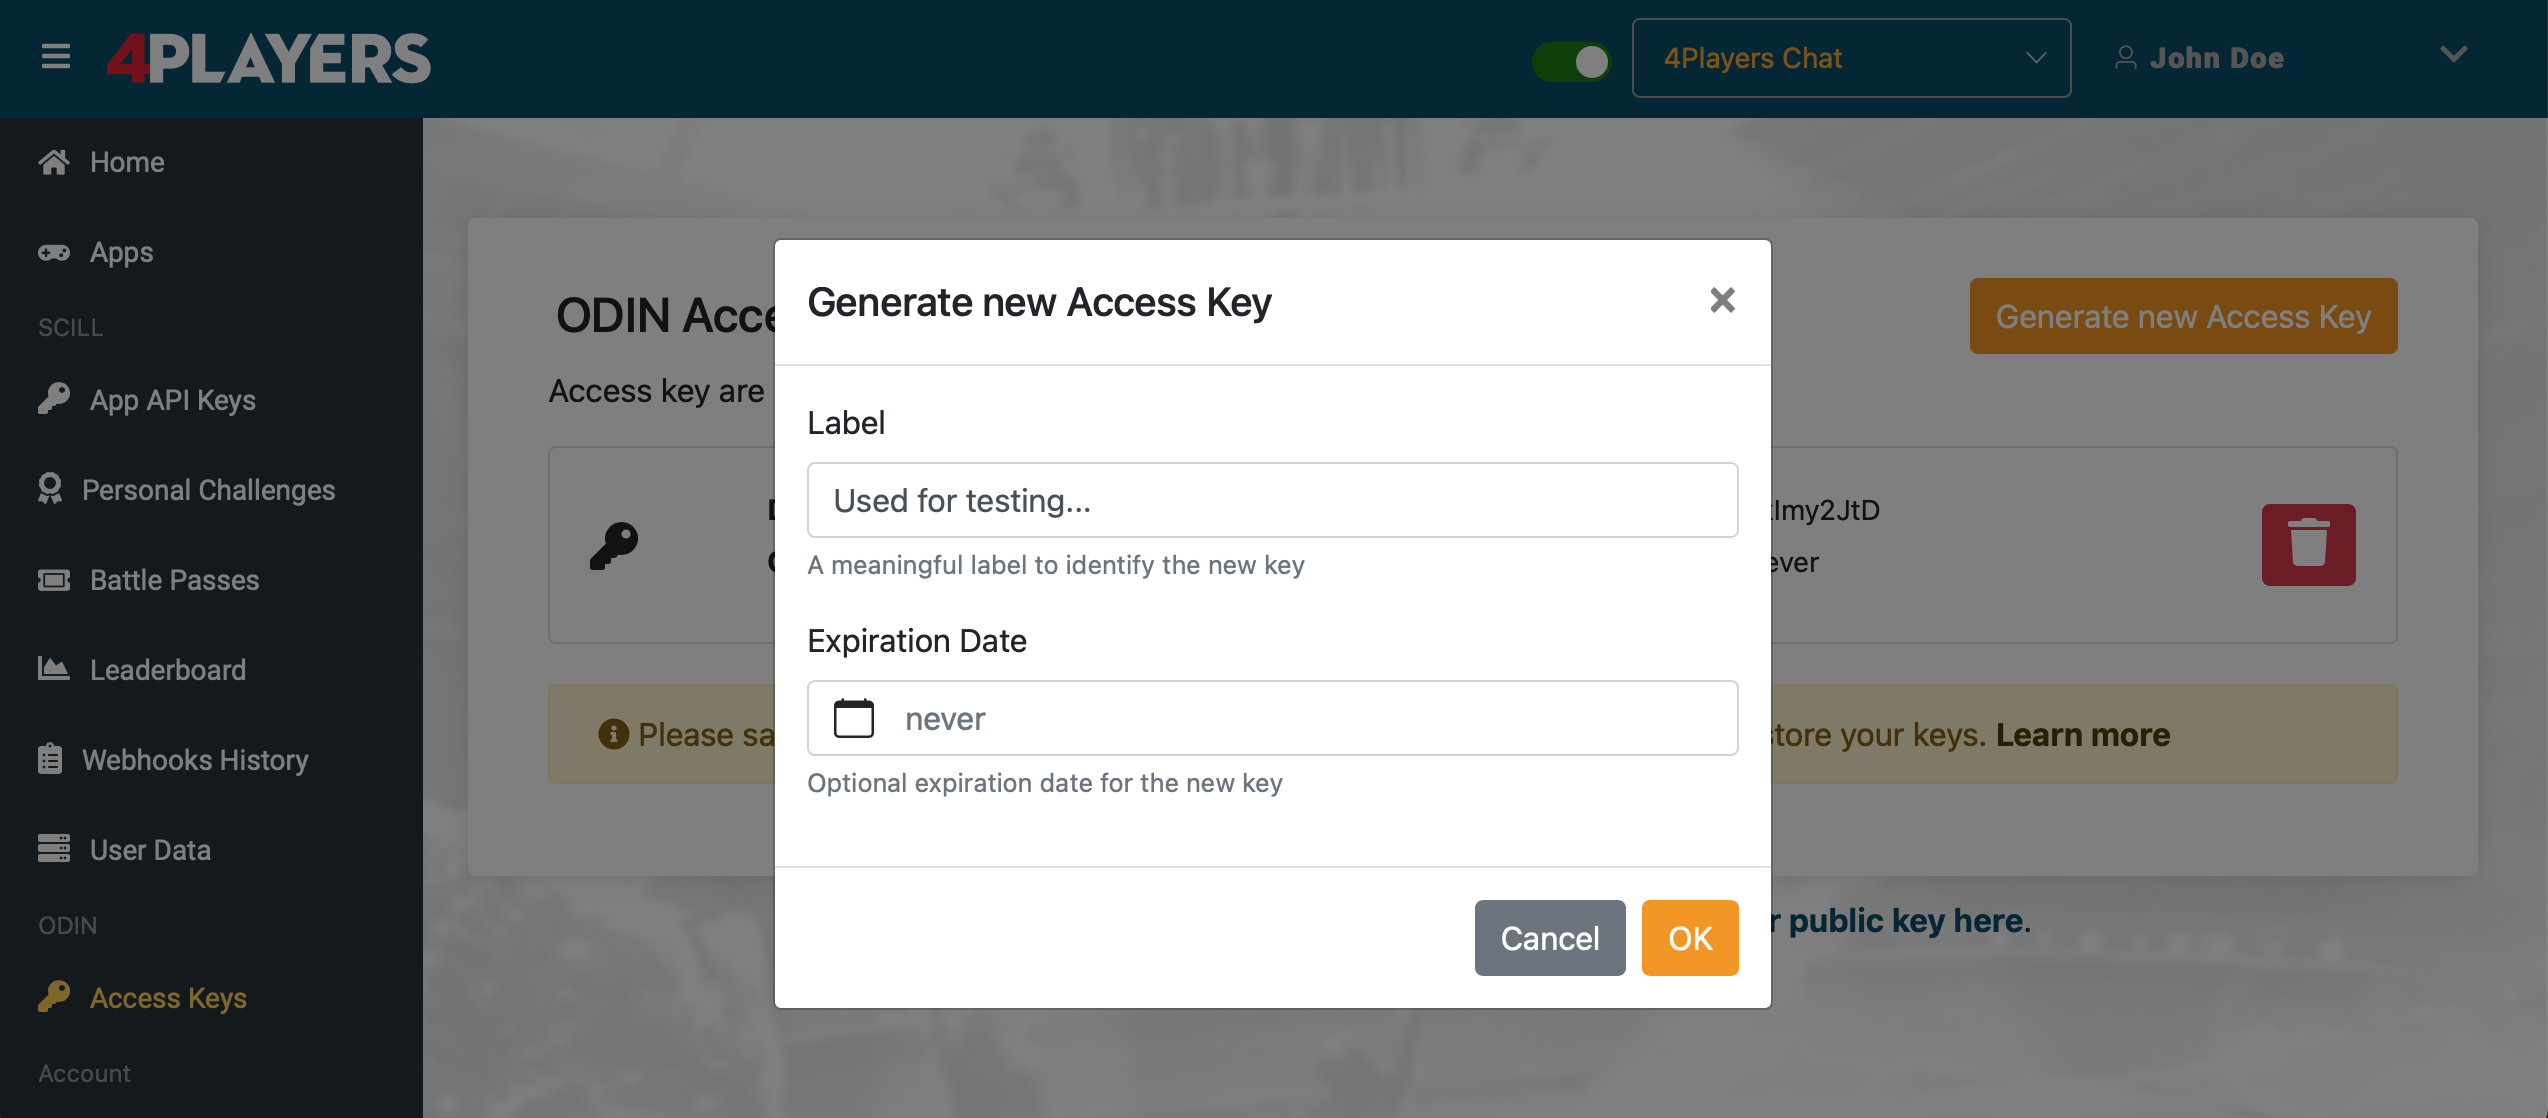 Configure your new access key